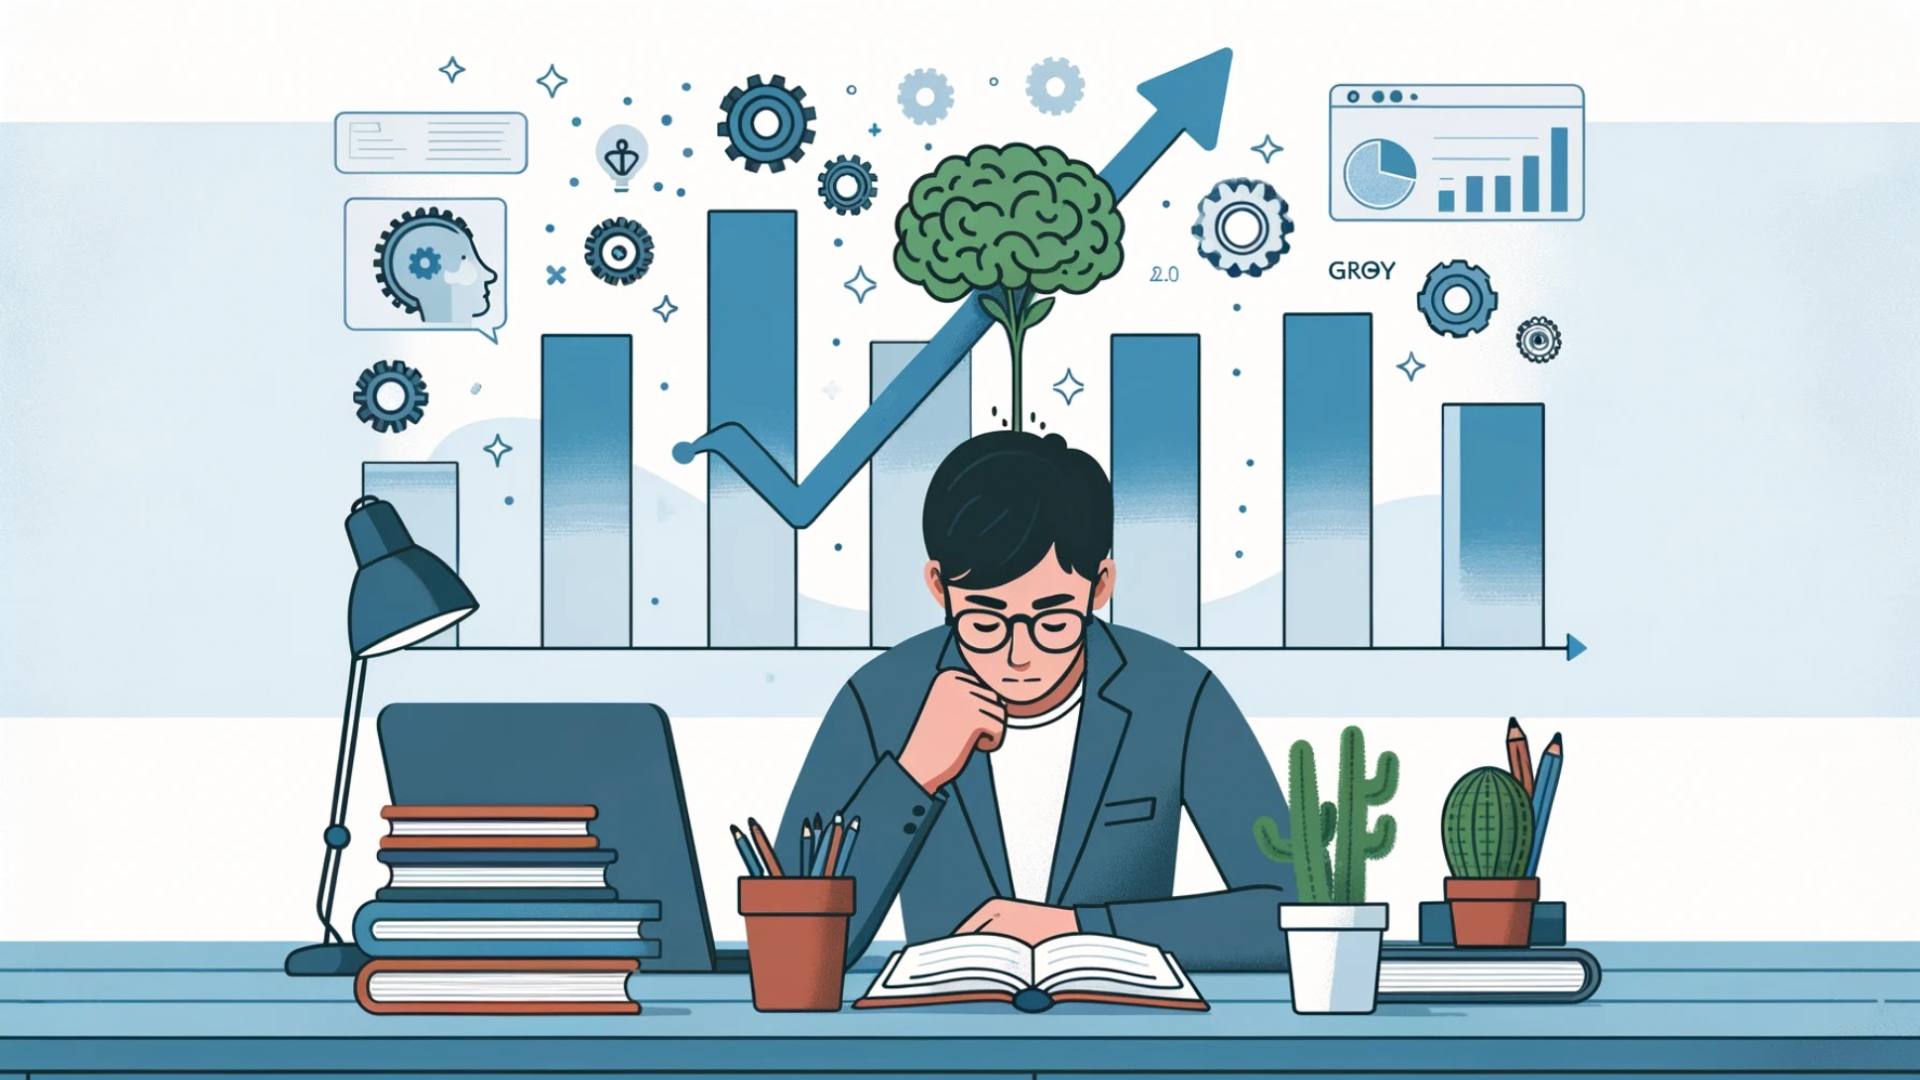 A cartoon graphic image is displaying a person wearing glasses looking down while sitting at a desk and reading a book.